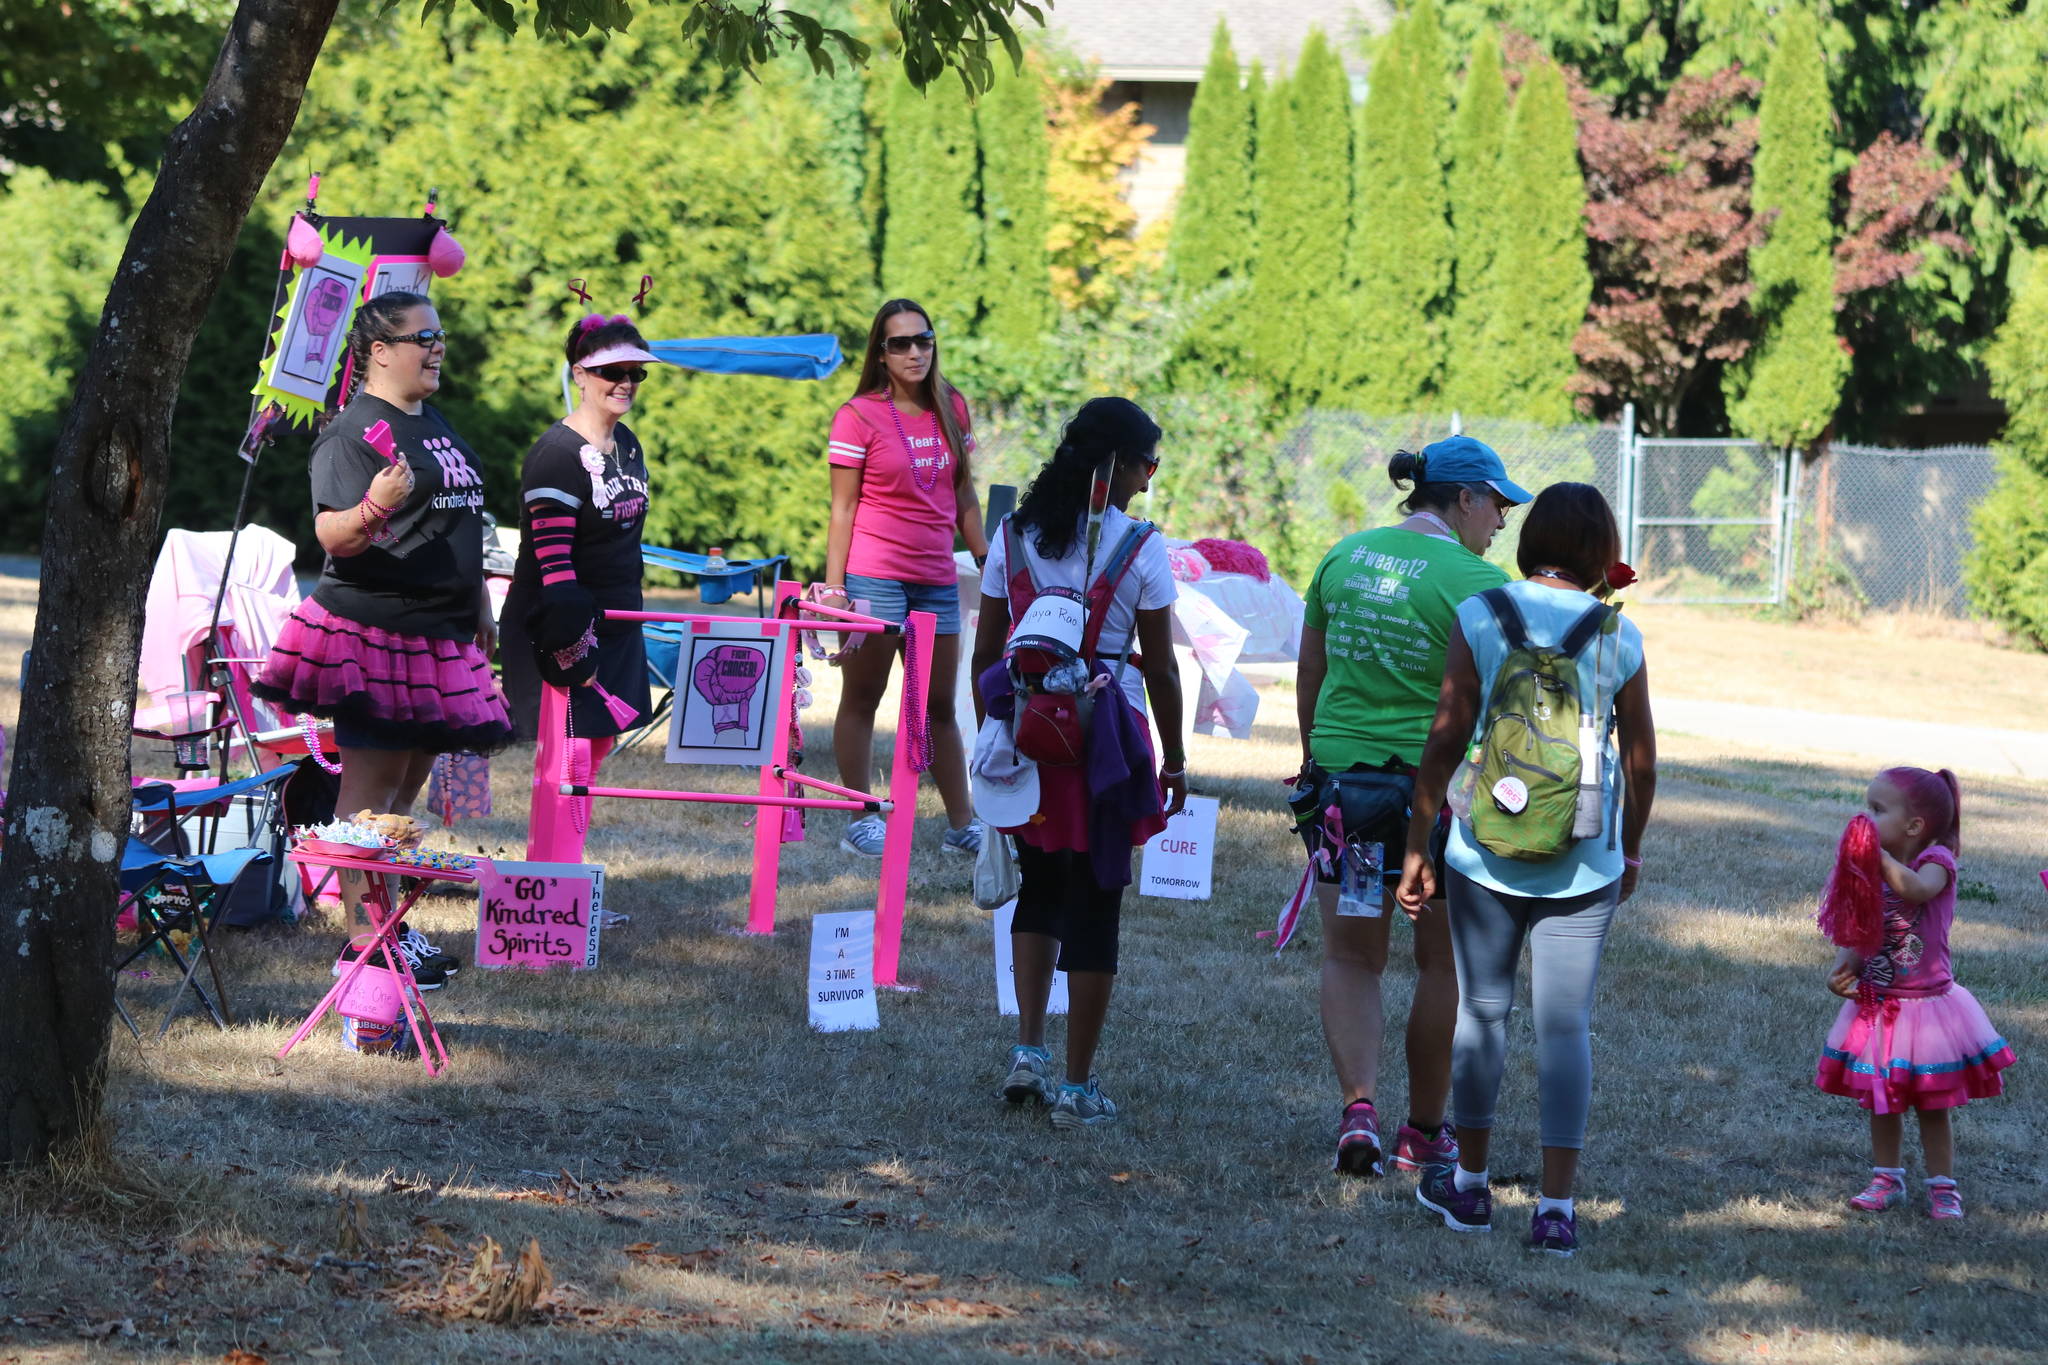 A cheering group greets Susan G. Komen 3-Day walkers Friday afternoon at Idylwood Park. The event is a fight against breast cancer. Andy Nystrom, Redmond Reporter